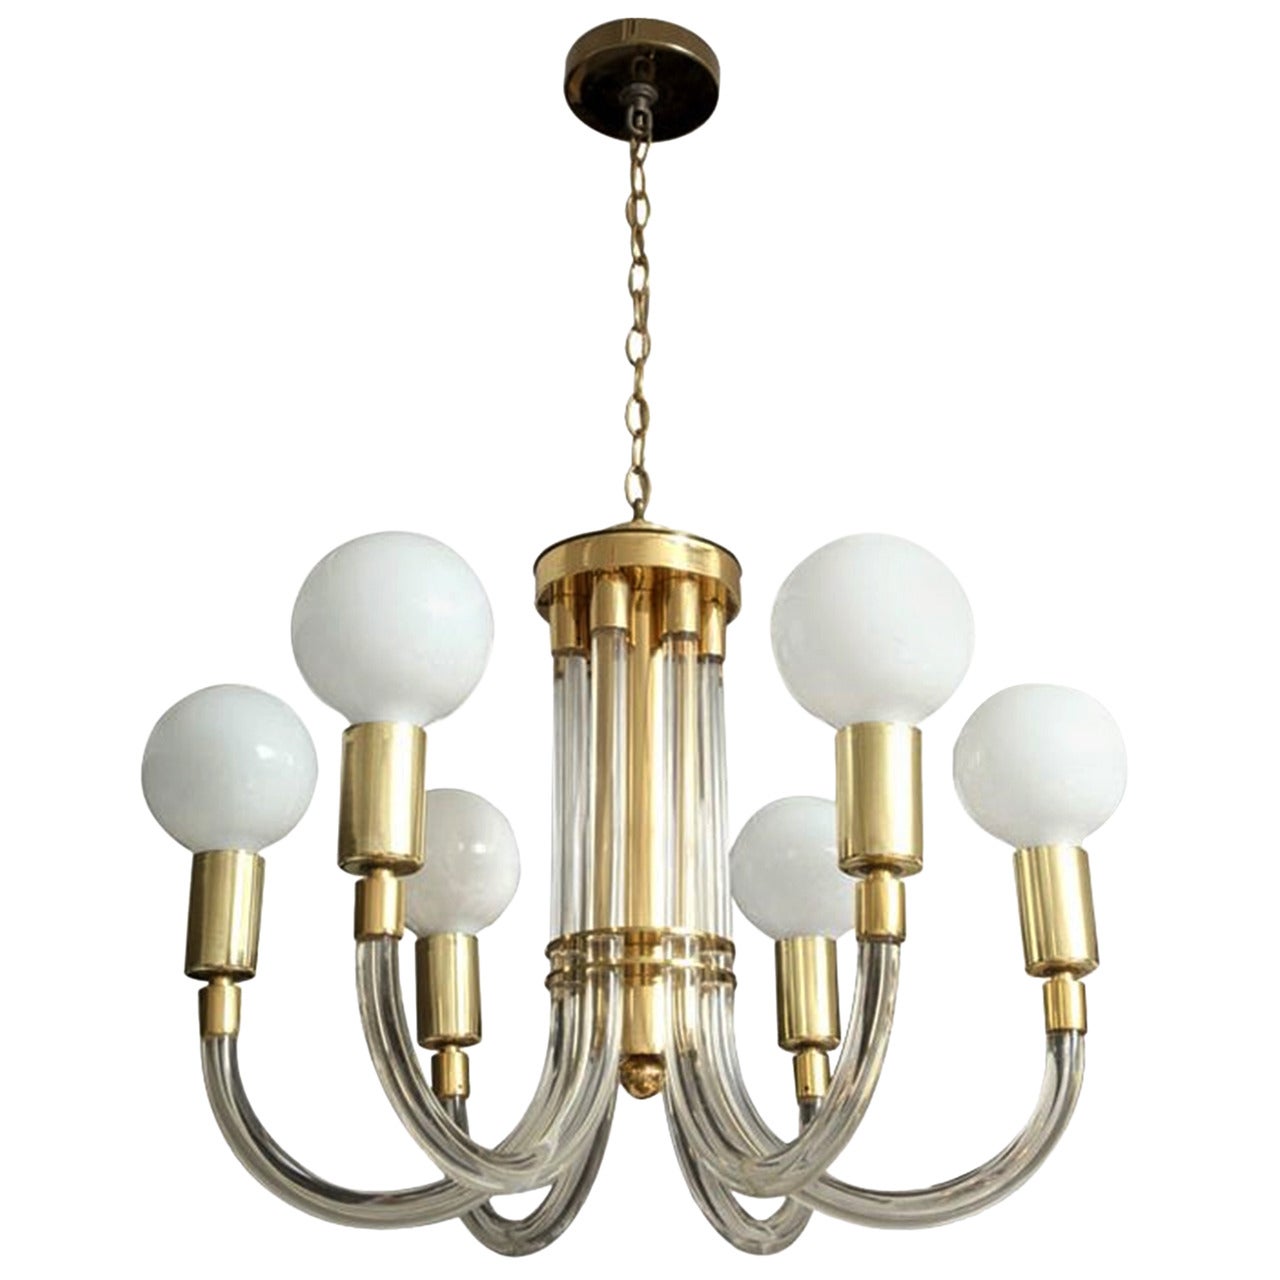 Charles Hollis Jones Six-Arm Chandelier in Brass and Lucite, Signed and Dated